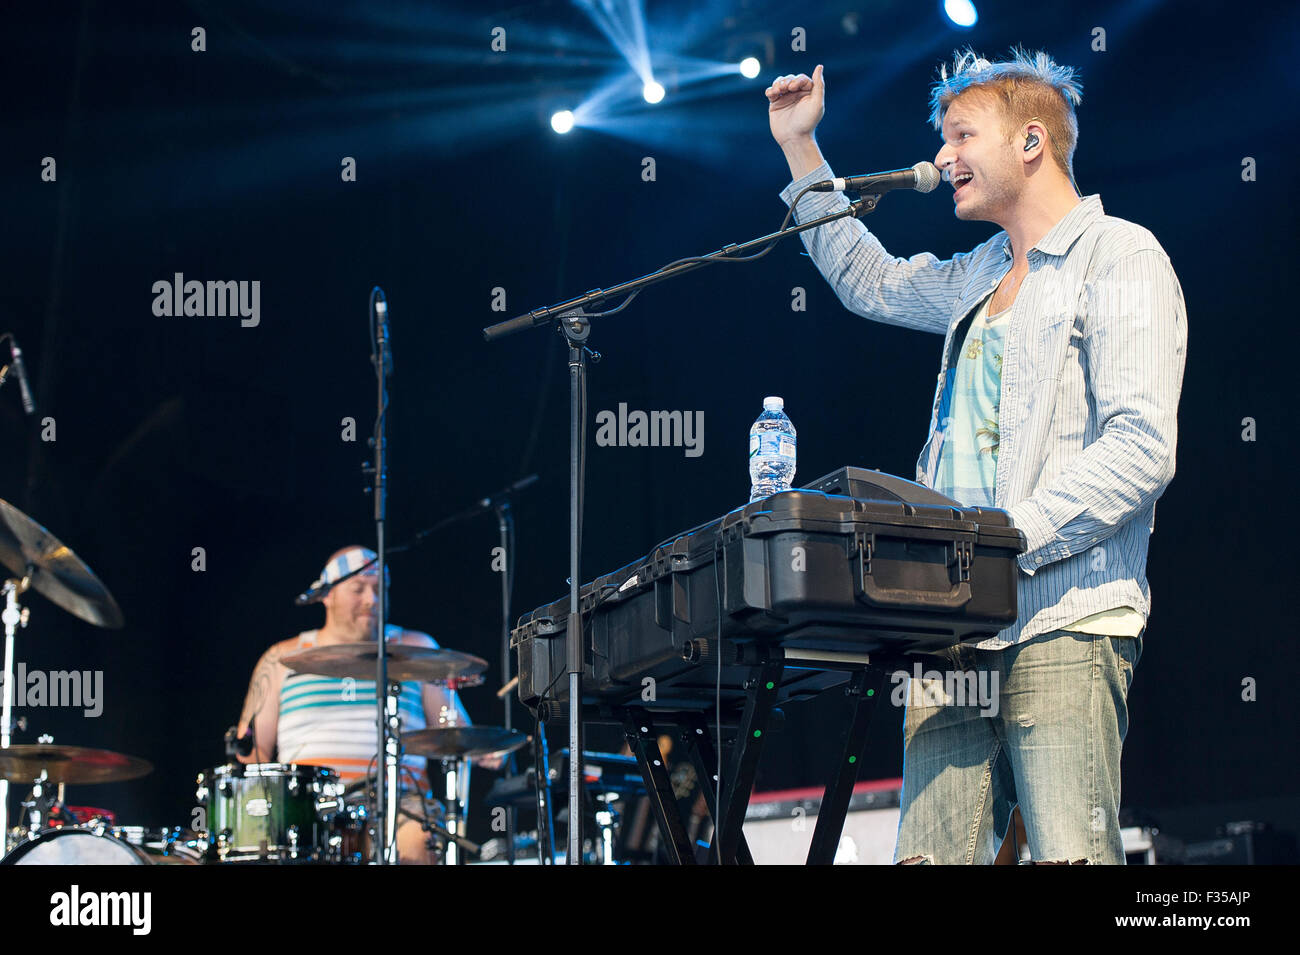 Coldplay Drummer 'in His Place' With Yamaha - Yamaha - United States